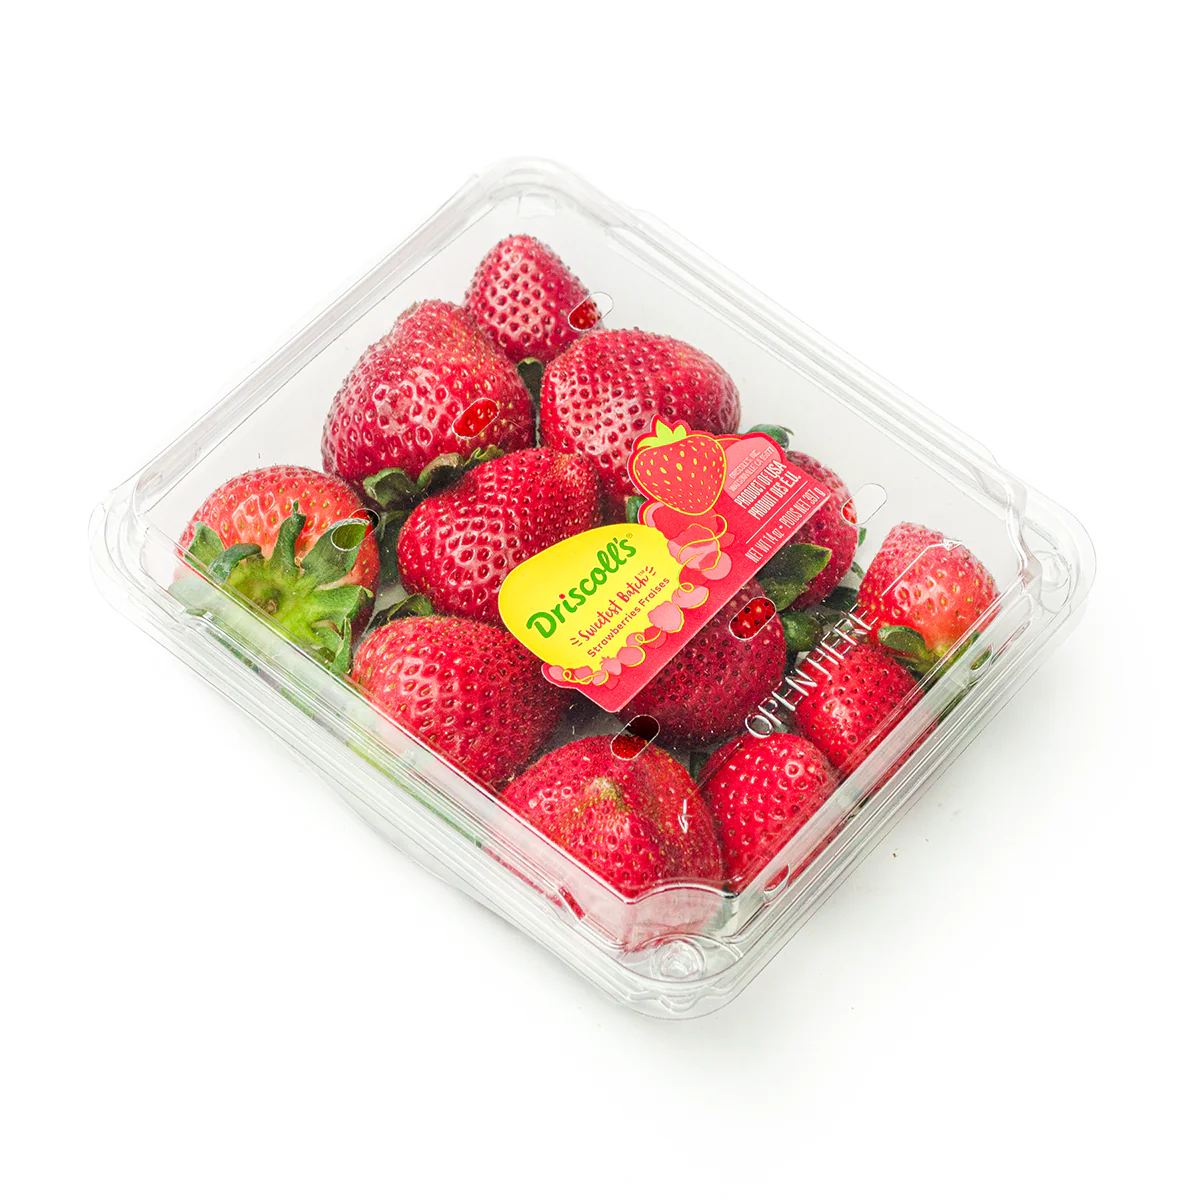 Sweetest Batch Strawberries Product of Mexico/U.S.A (397g/Case)